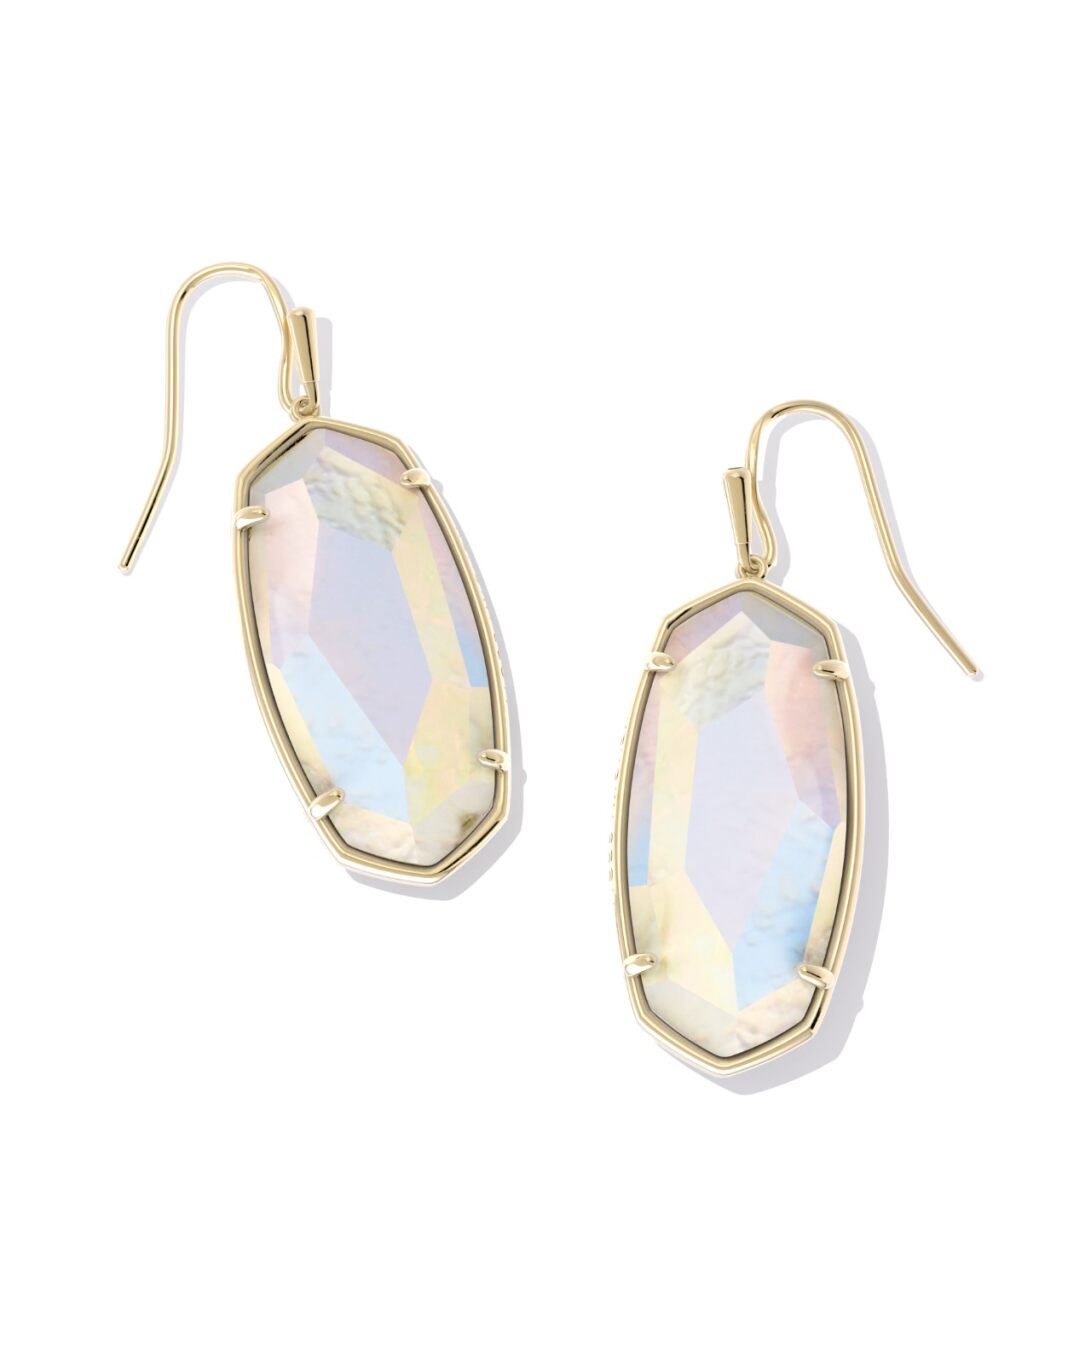 Faceted Elle Drop Earrings Gold Iridescent Opalite Illusion